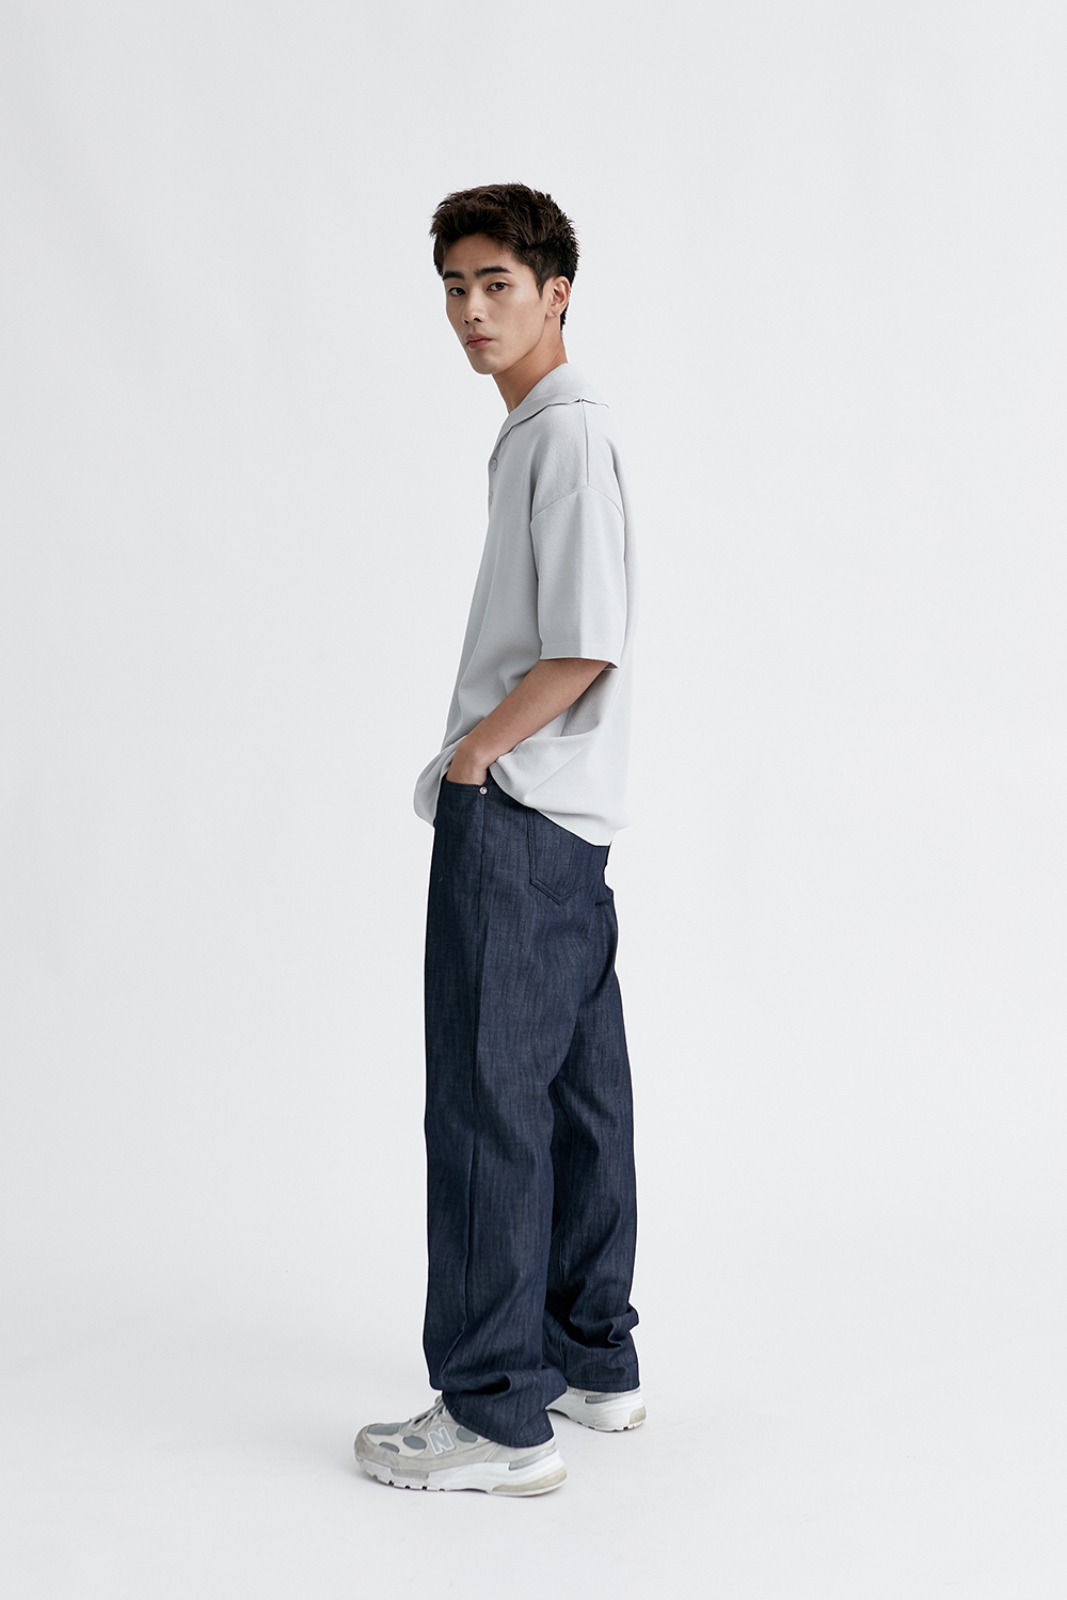 2022 S/S COLLECTION#2 LOOKBOOK